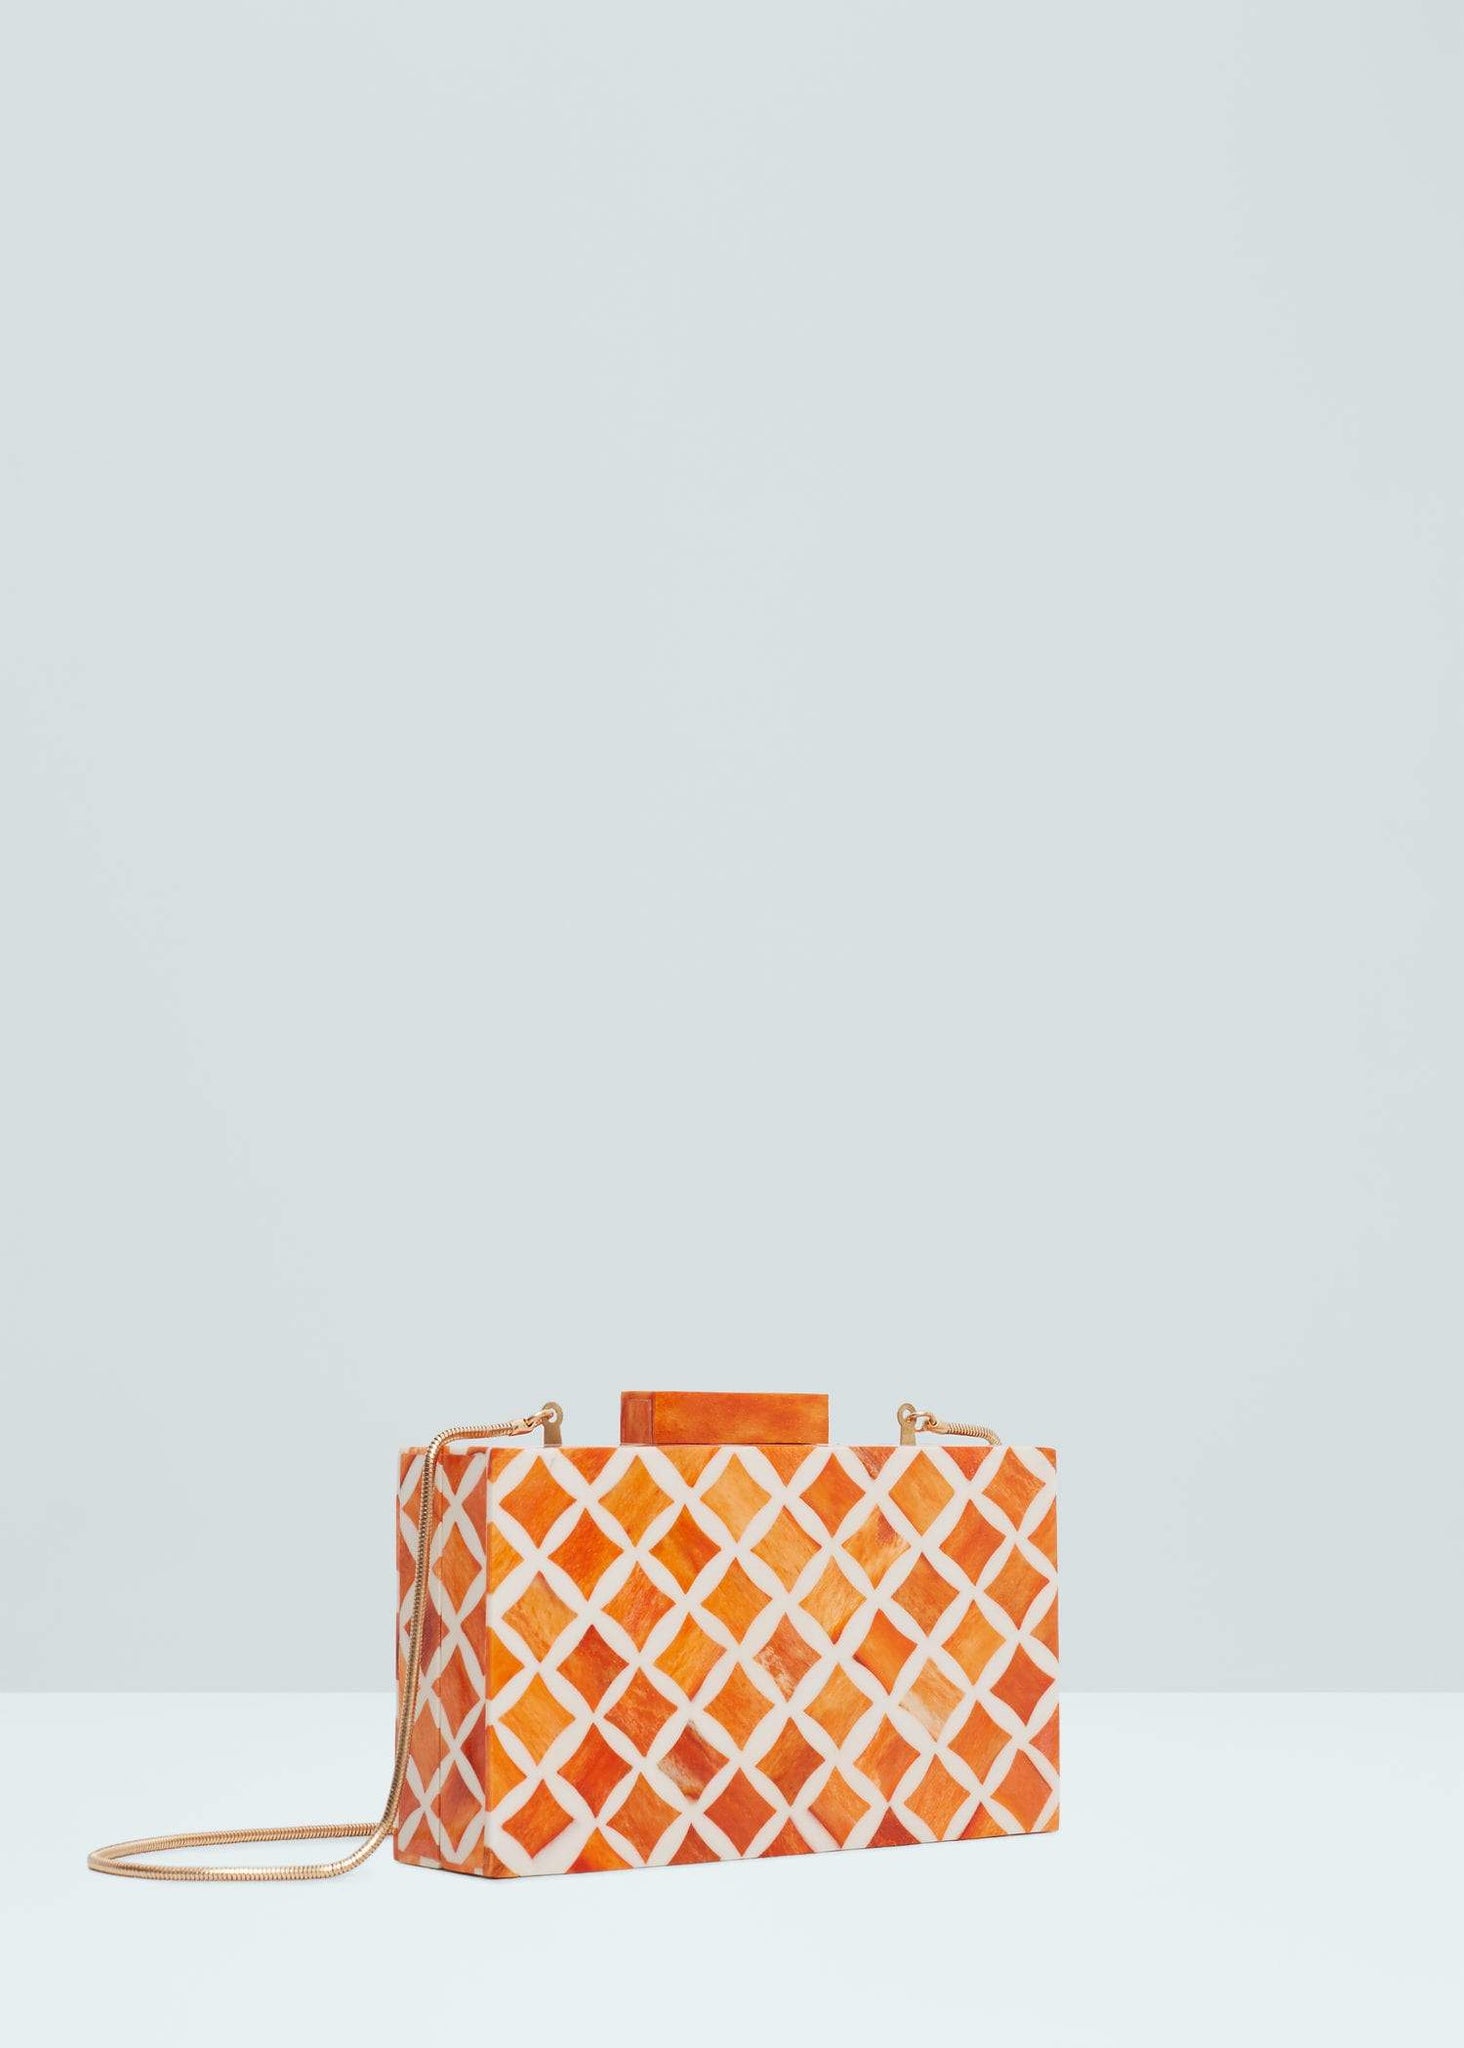 Mango Geometric Coral Red Womens Clutch - Stockpoint Apparel Outlet